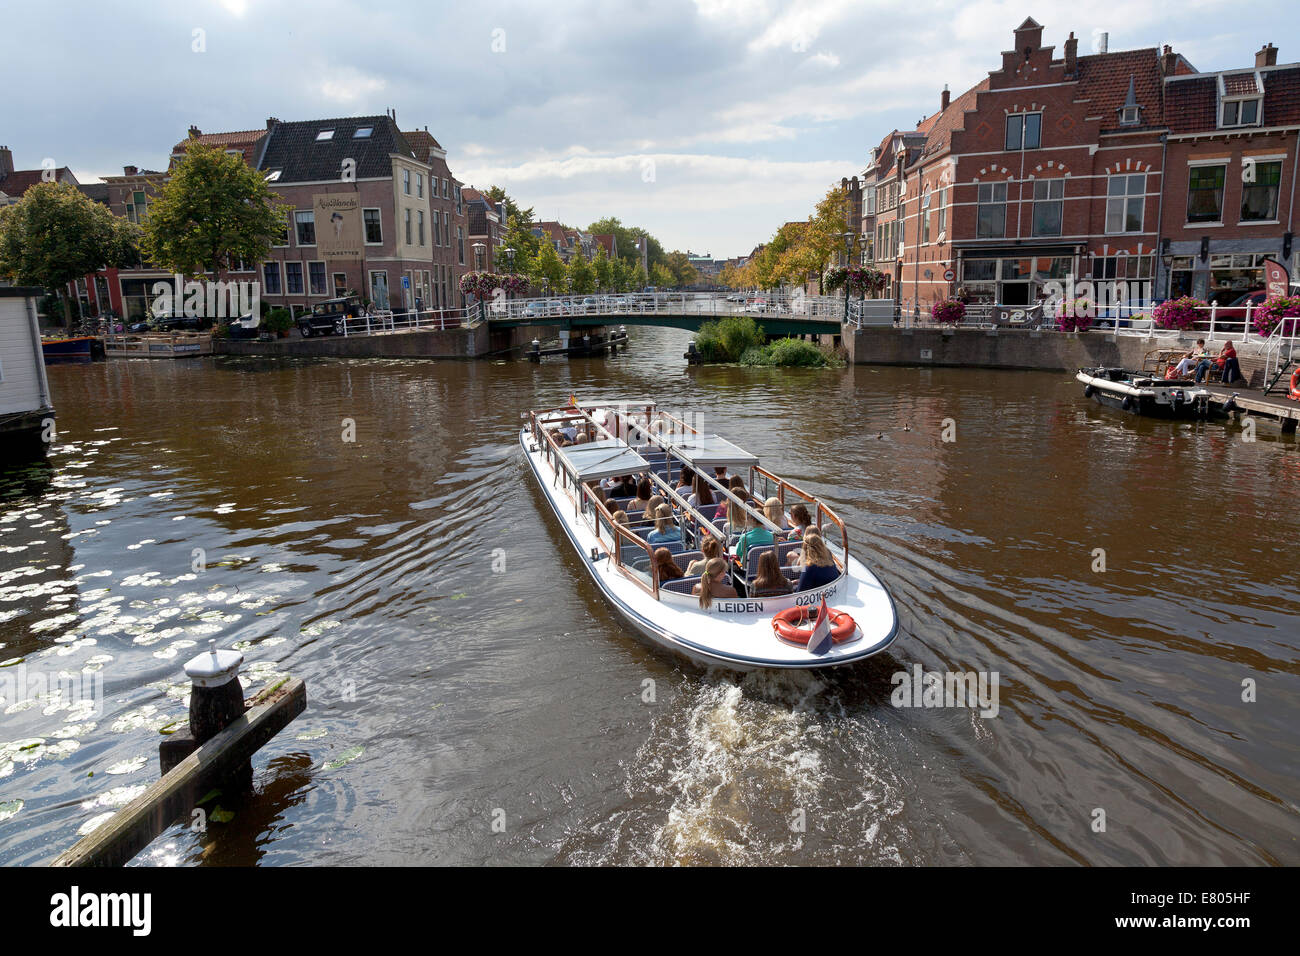 Canal boat in canal on Herengracht, Leiden, Netherlands Stock Photo